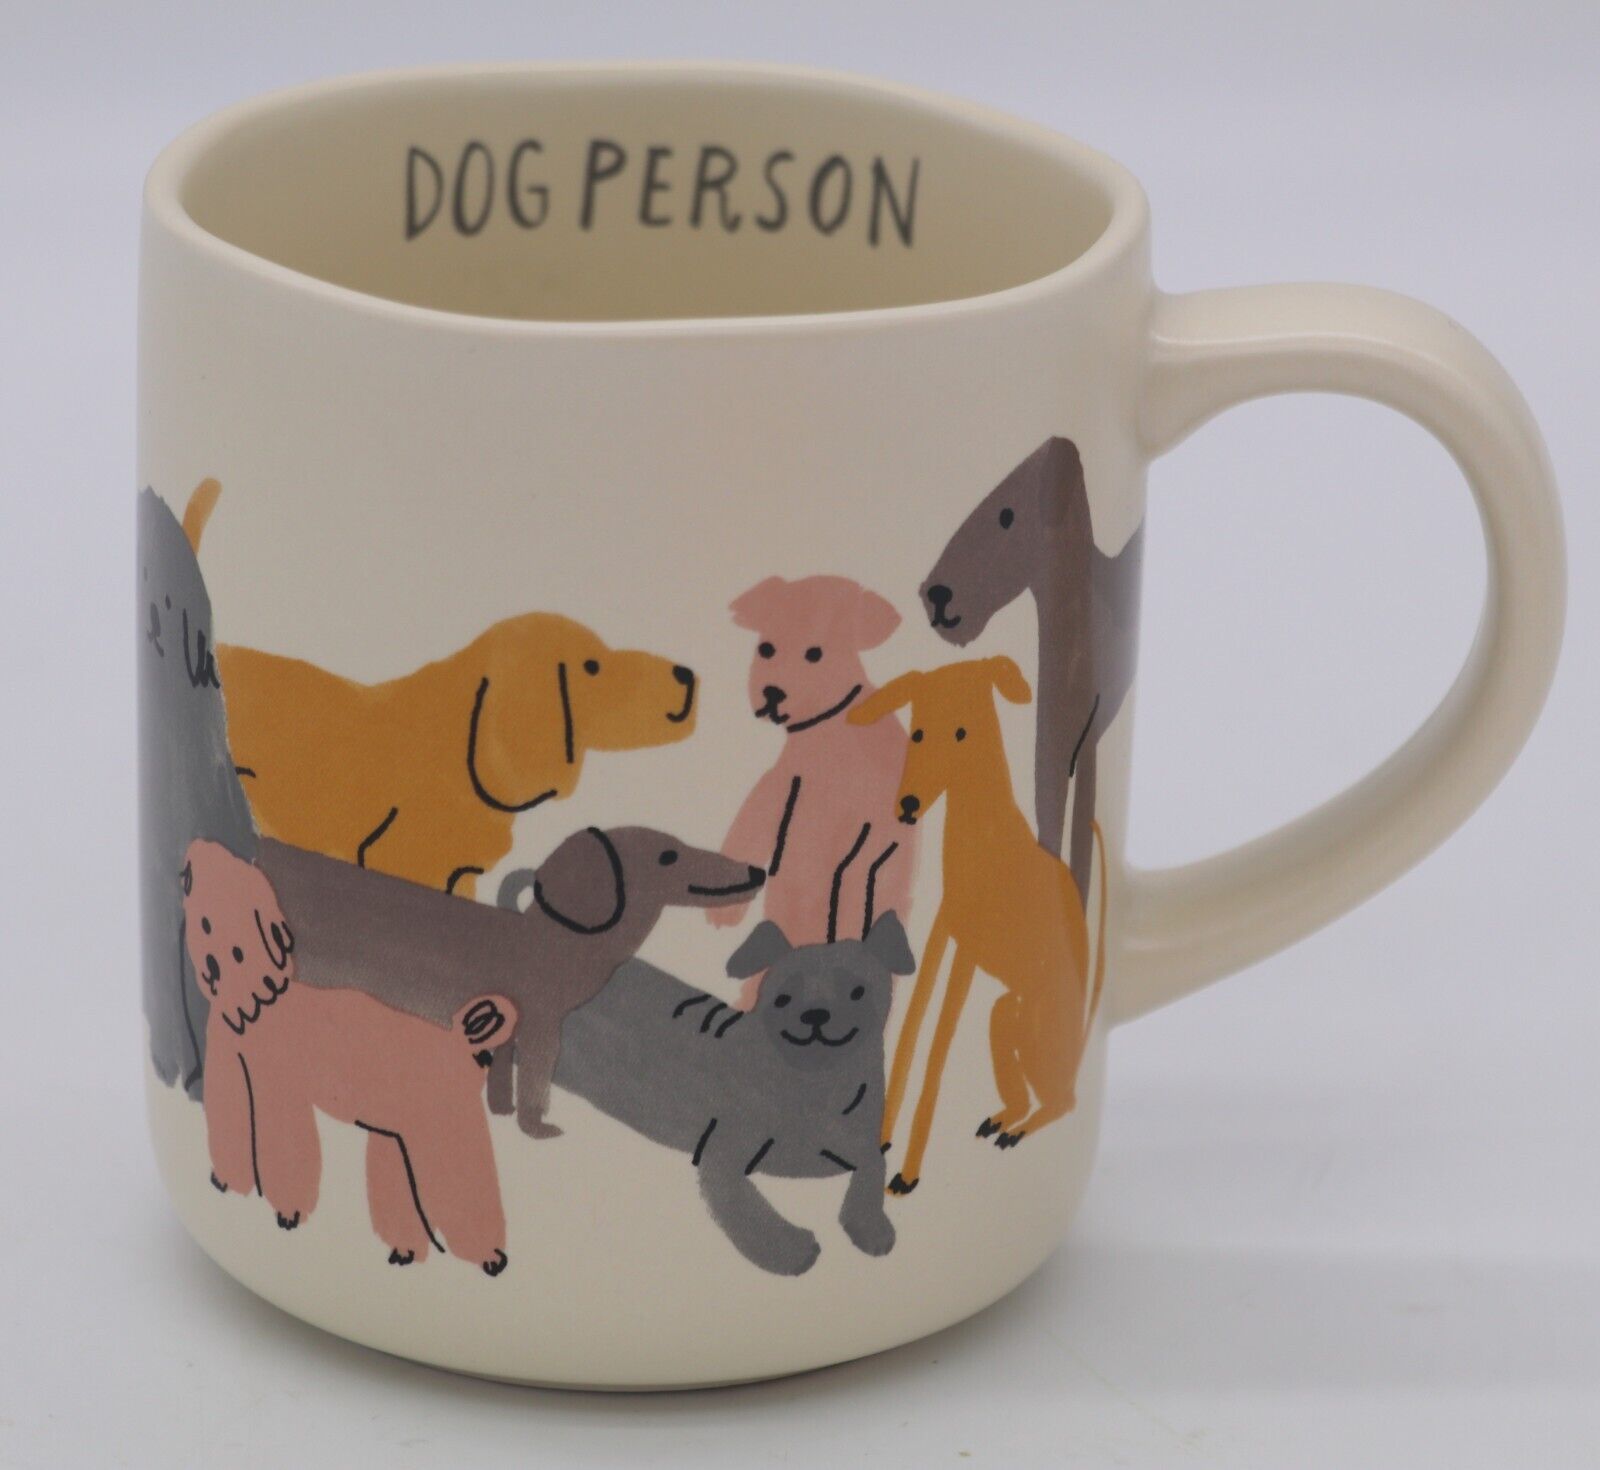 OPALHOUSE DOG PERSON COLLECTIBLE COFFEE MUG CUP GIFT 4 1/8